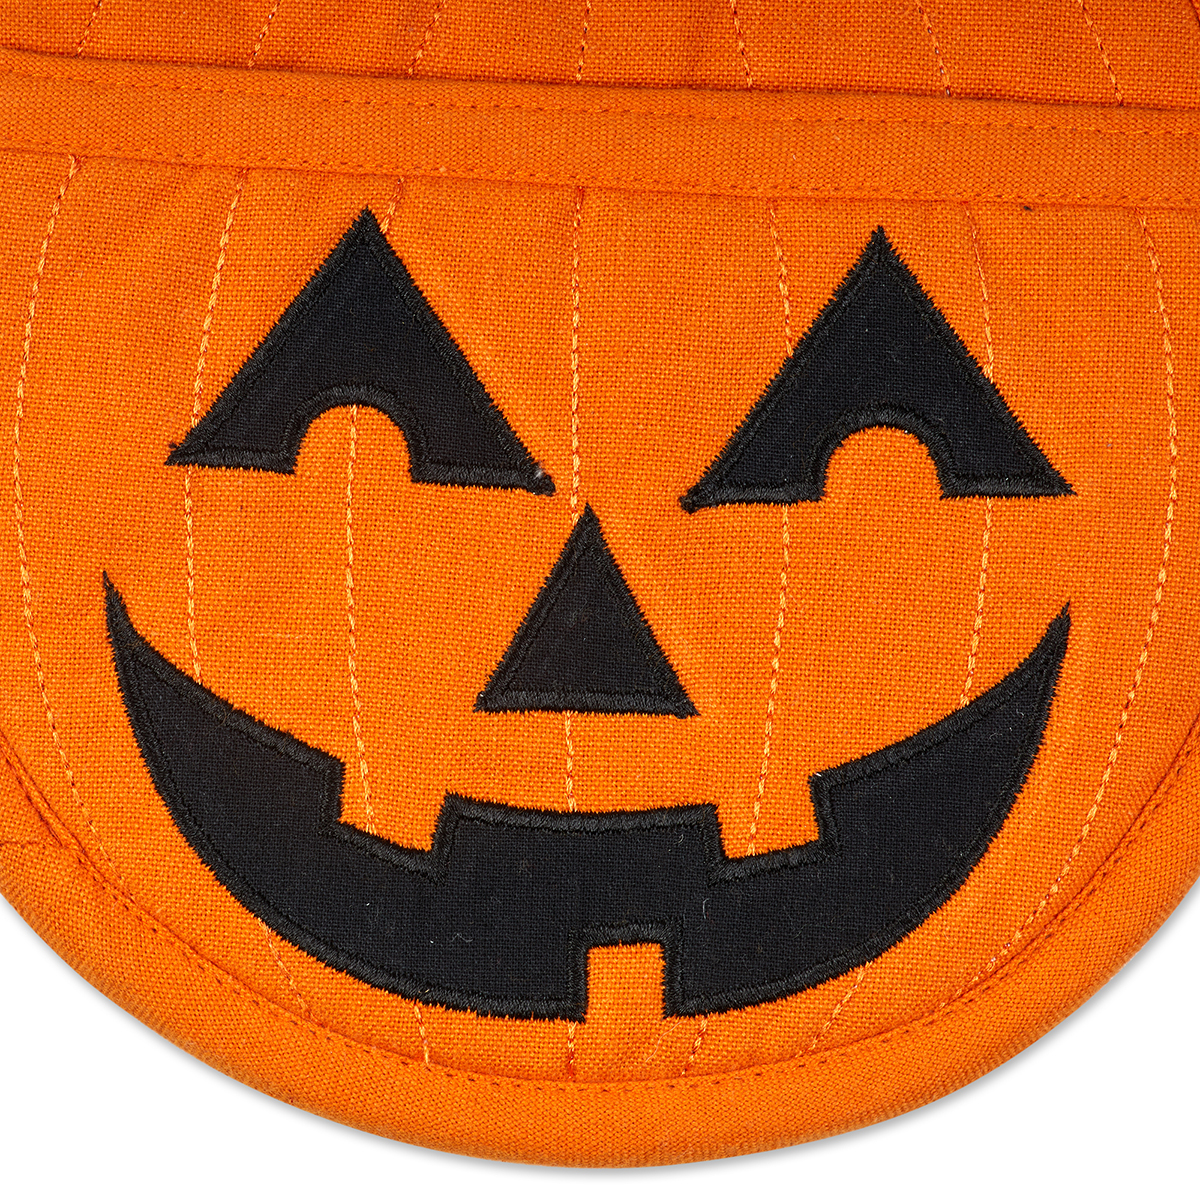 DII(R) Boo Apron And Potholder Set Of 3